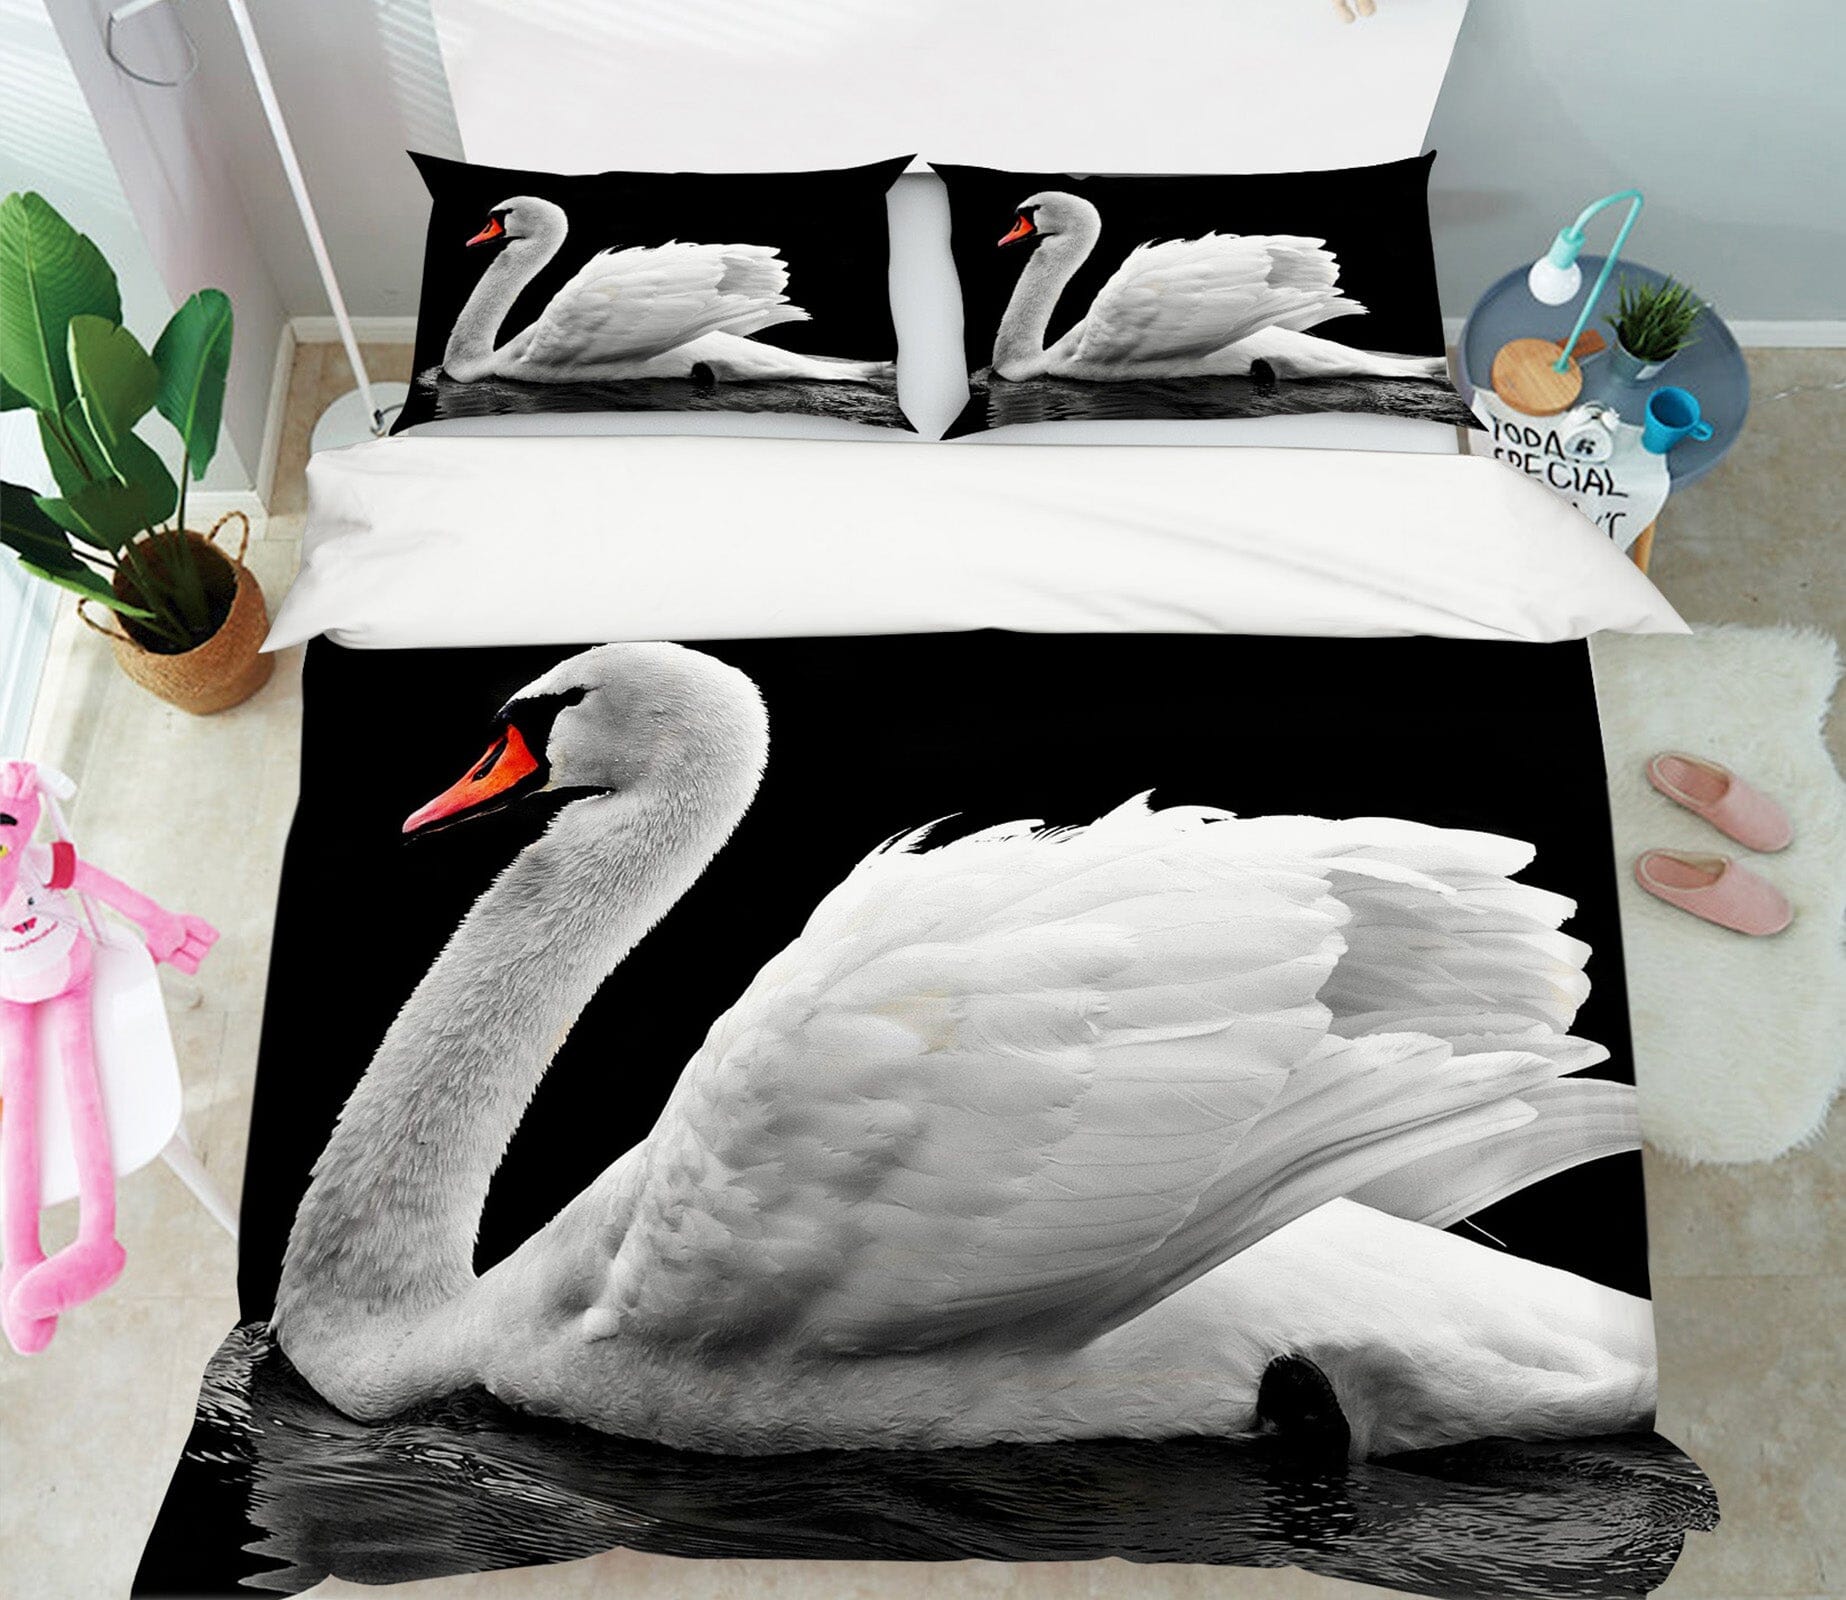 3D White Swan 1947 Bed Pillowcases Quilt Quiet Covers AJ Creativity Home 